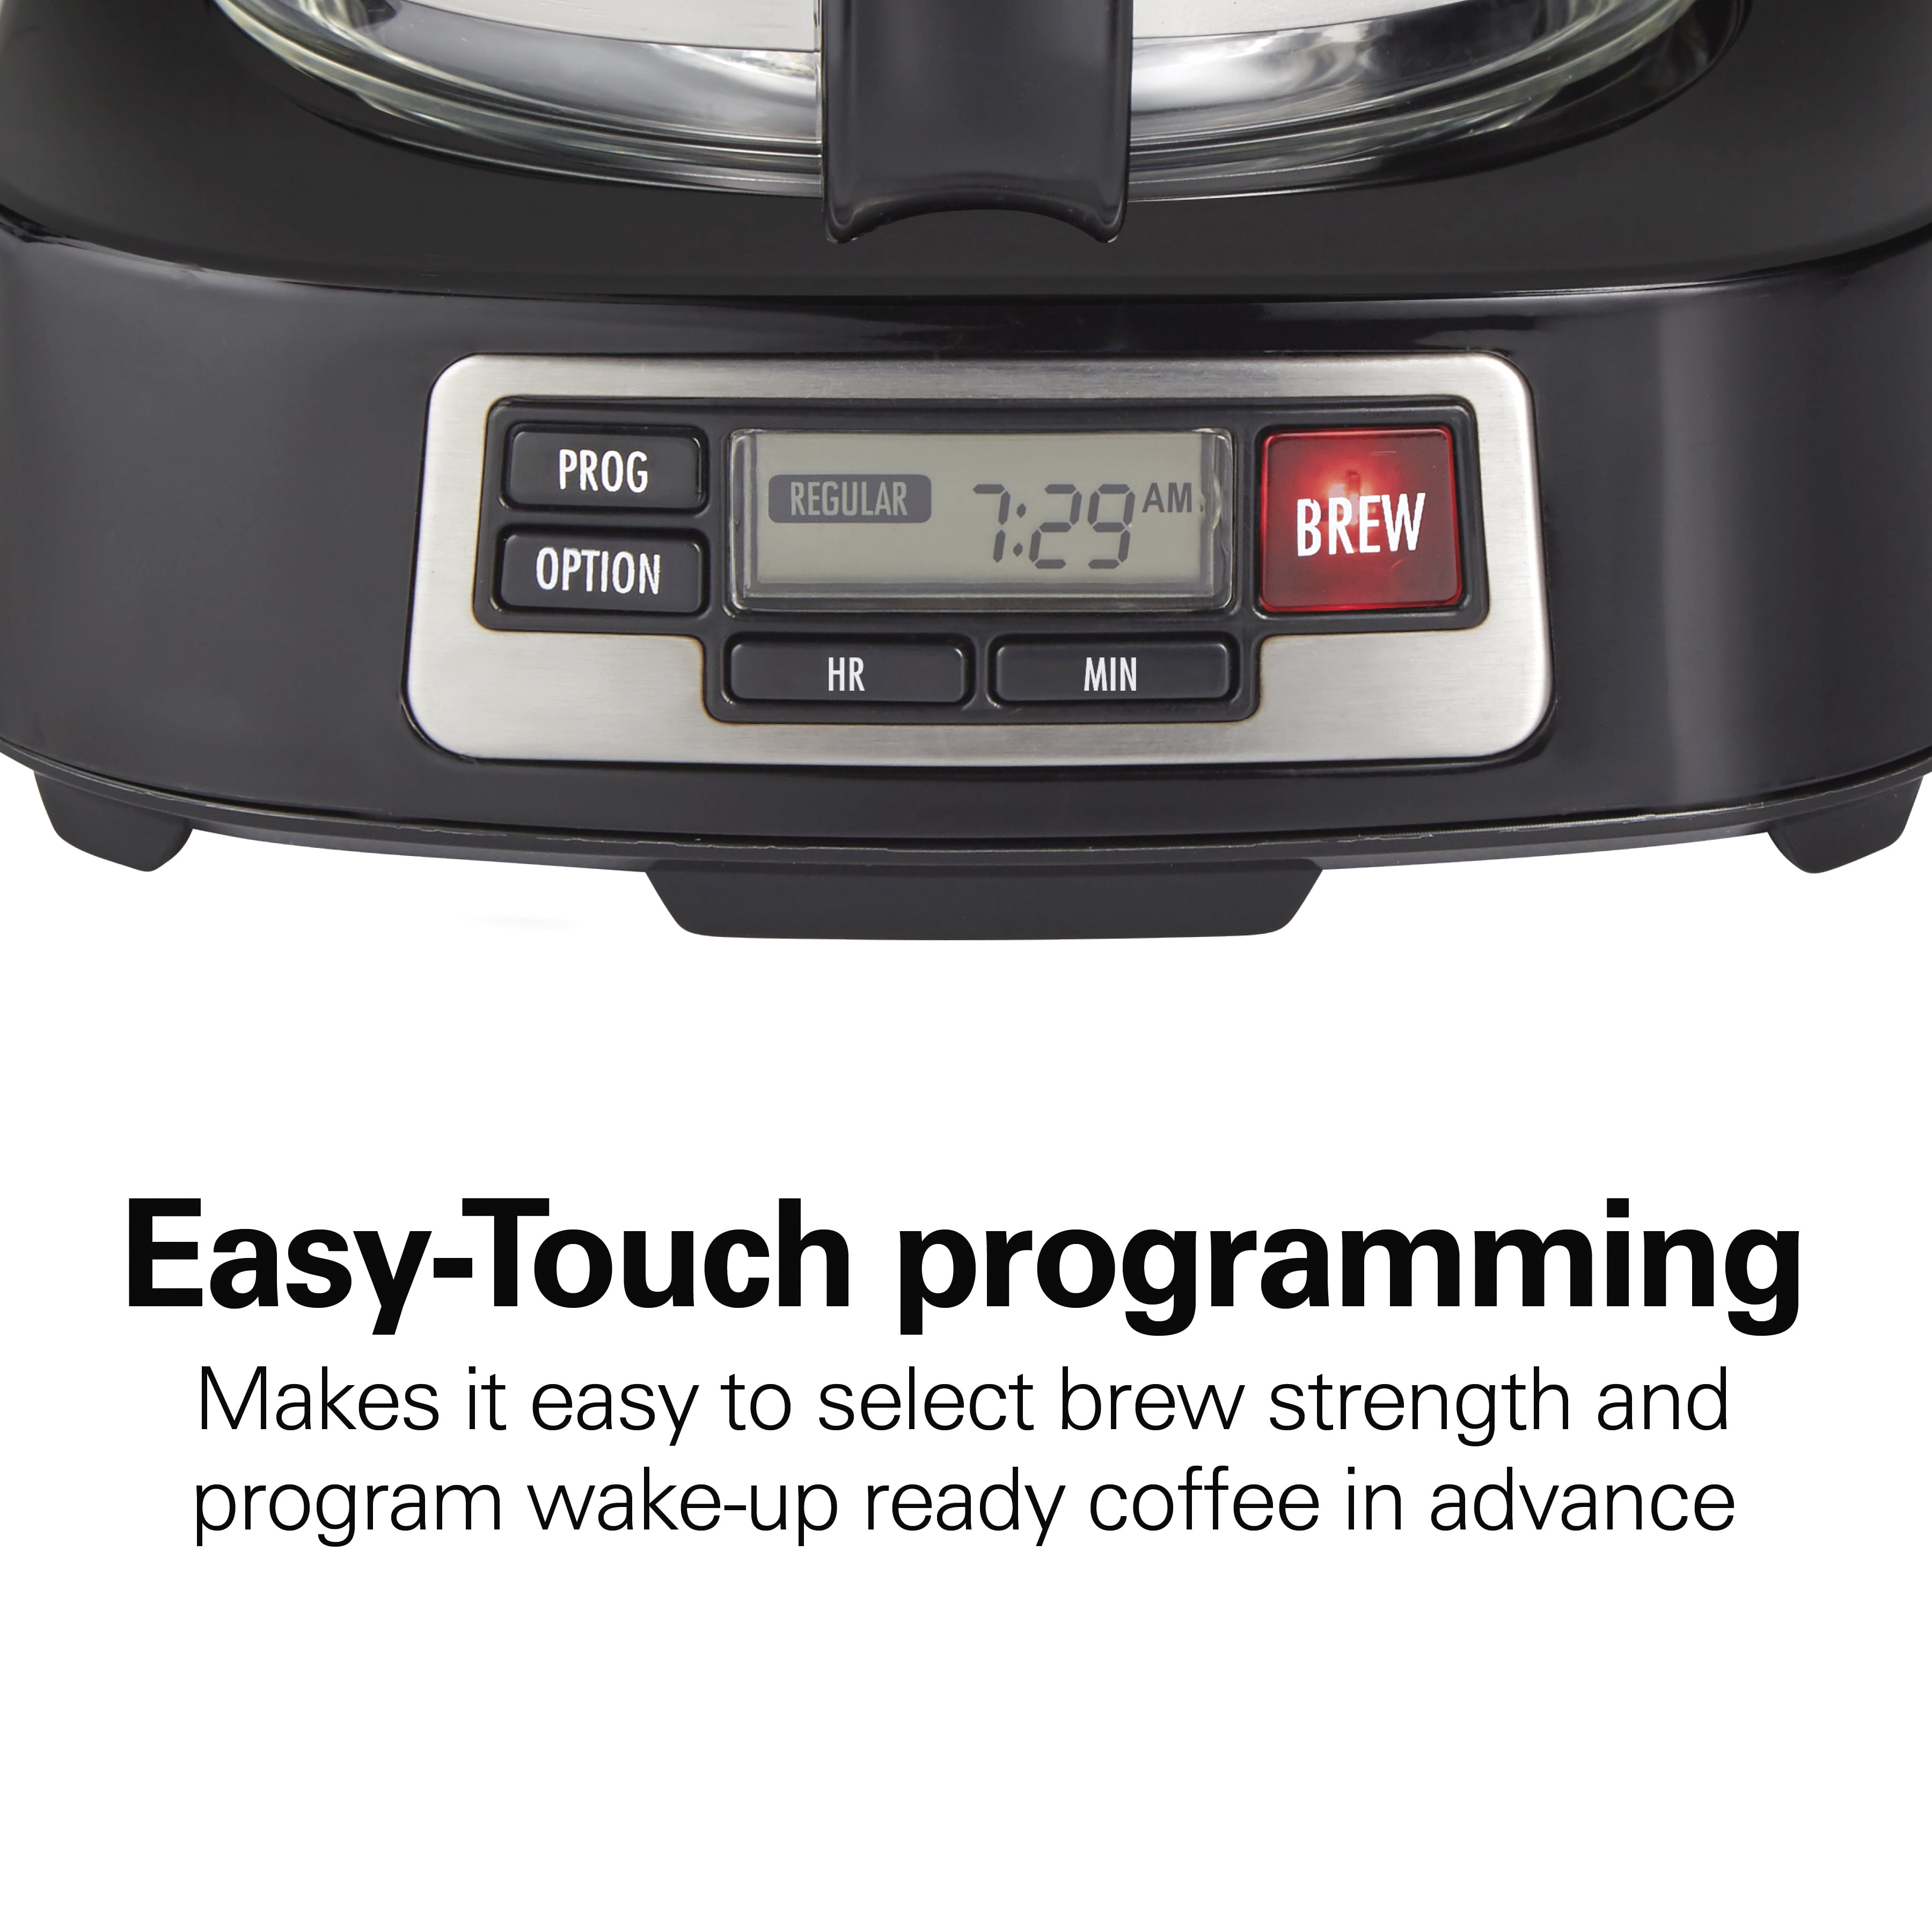 Hamilton Beach Compact 5-Cup Coffee Maker with Programmable Timer BLACK  46111 - Best Buy